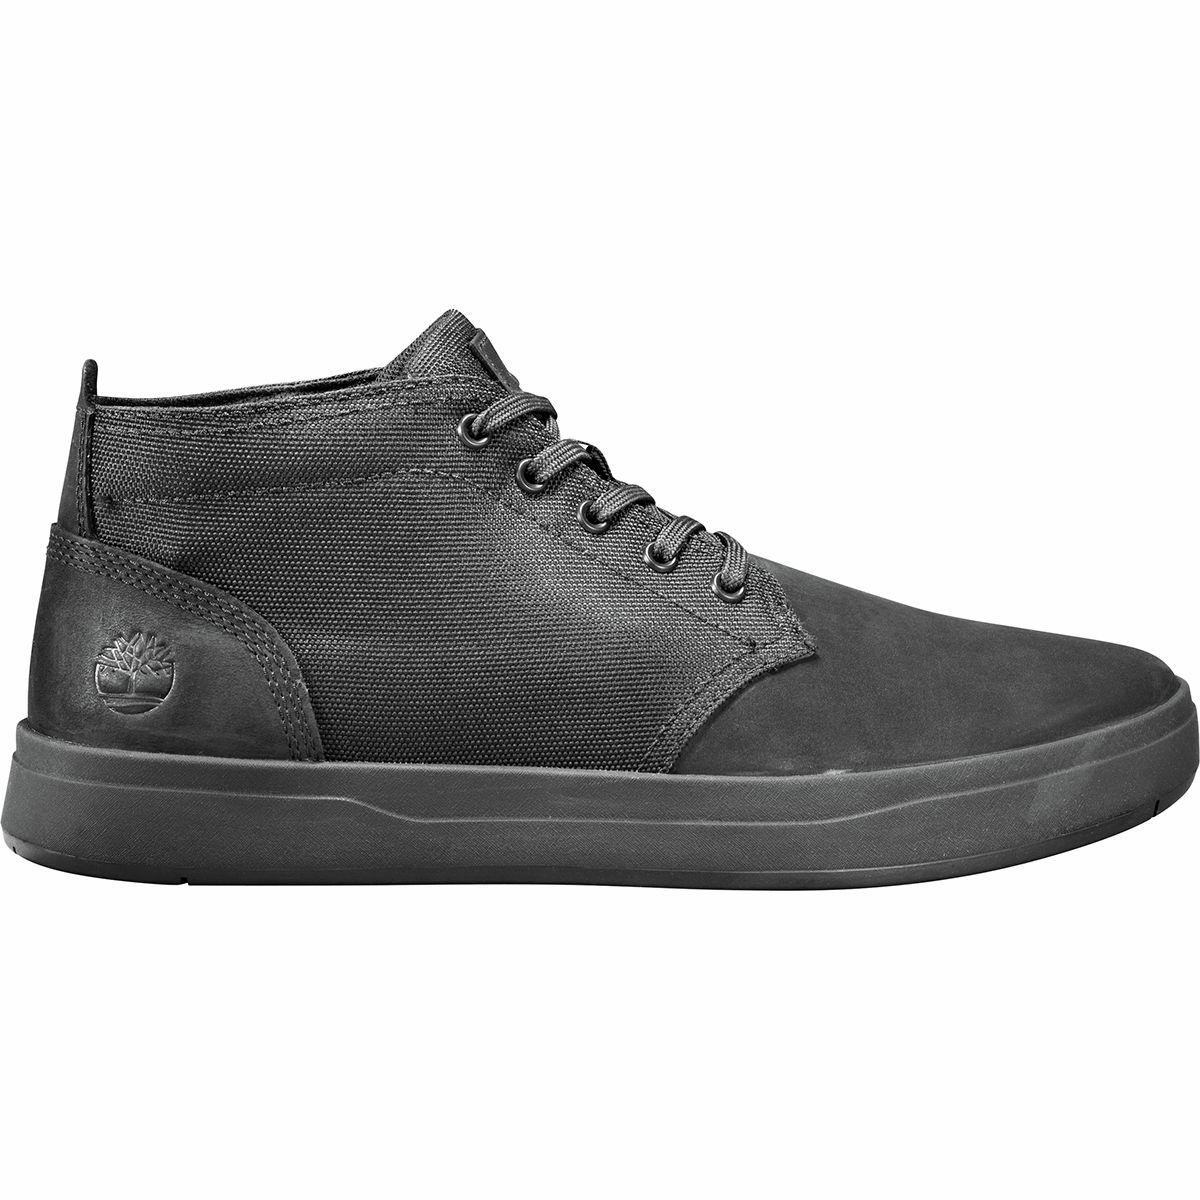 Timberland Davis Square Fabric & Leather Chukka in Black for Men - Lyst